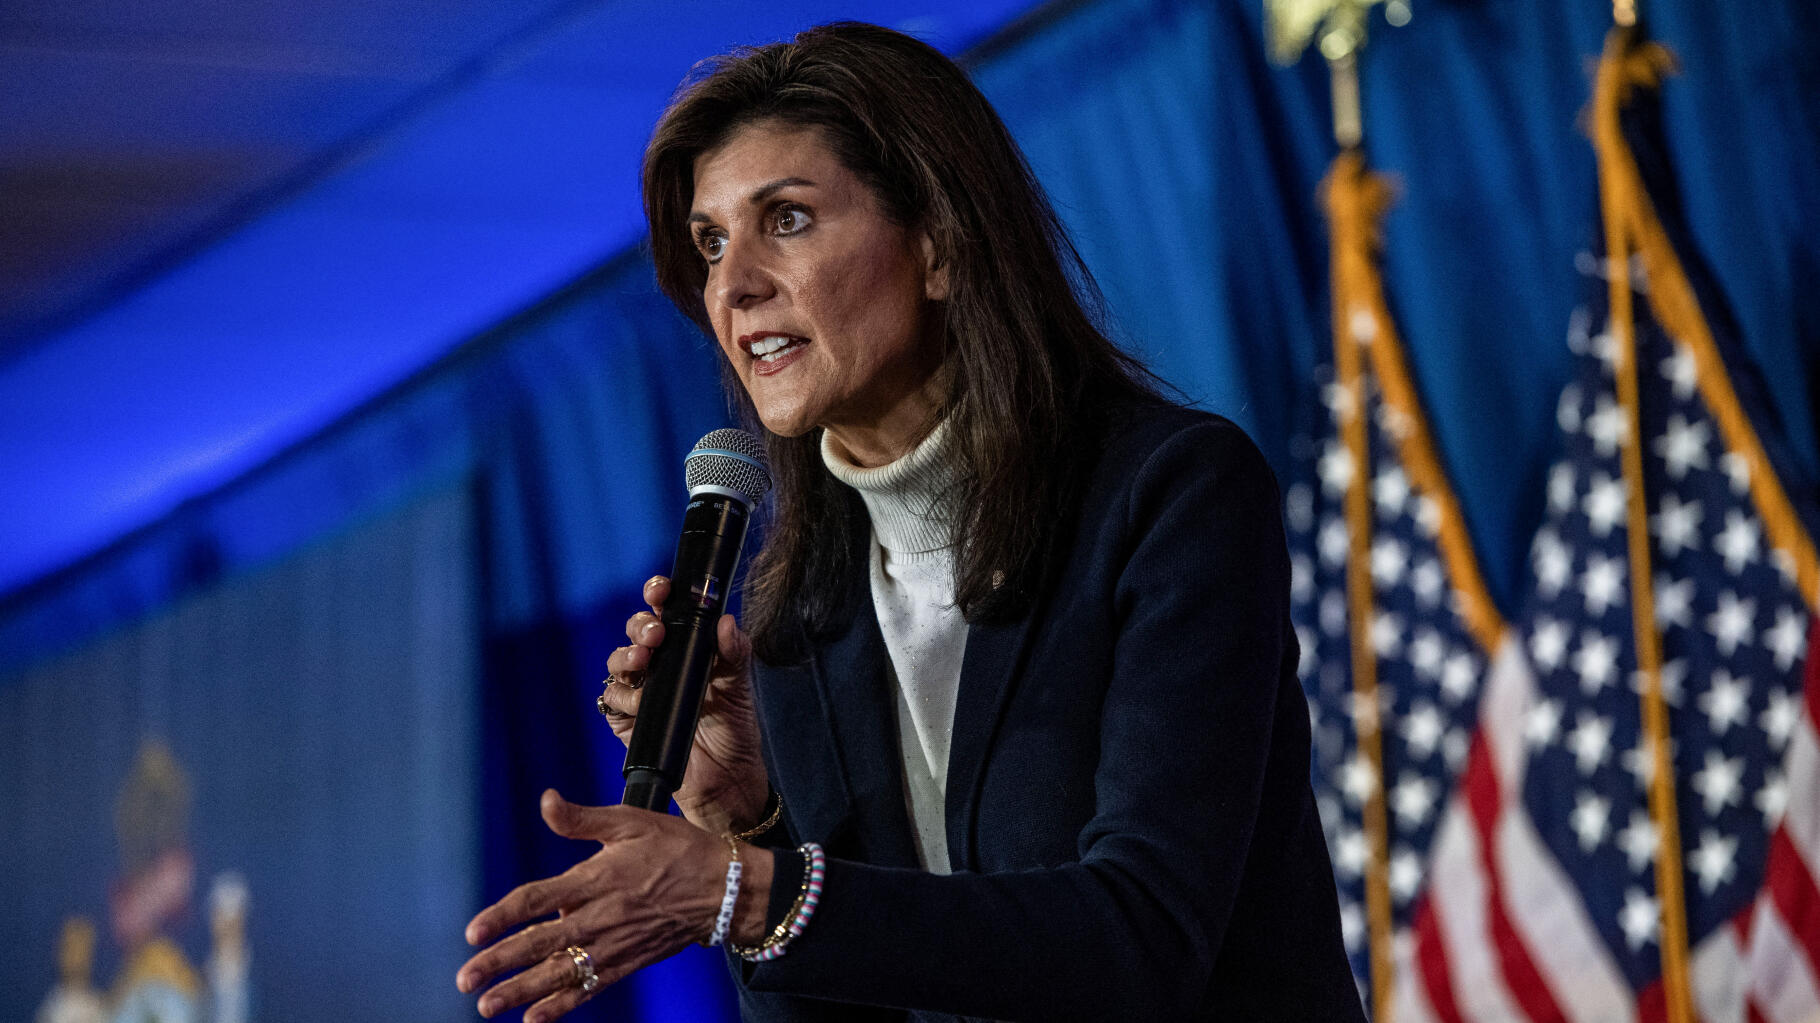 Only Donald Trump, the Republican candidate in the US presidential election, has thrown in the towel on Nikki Haley.